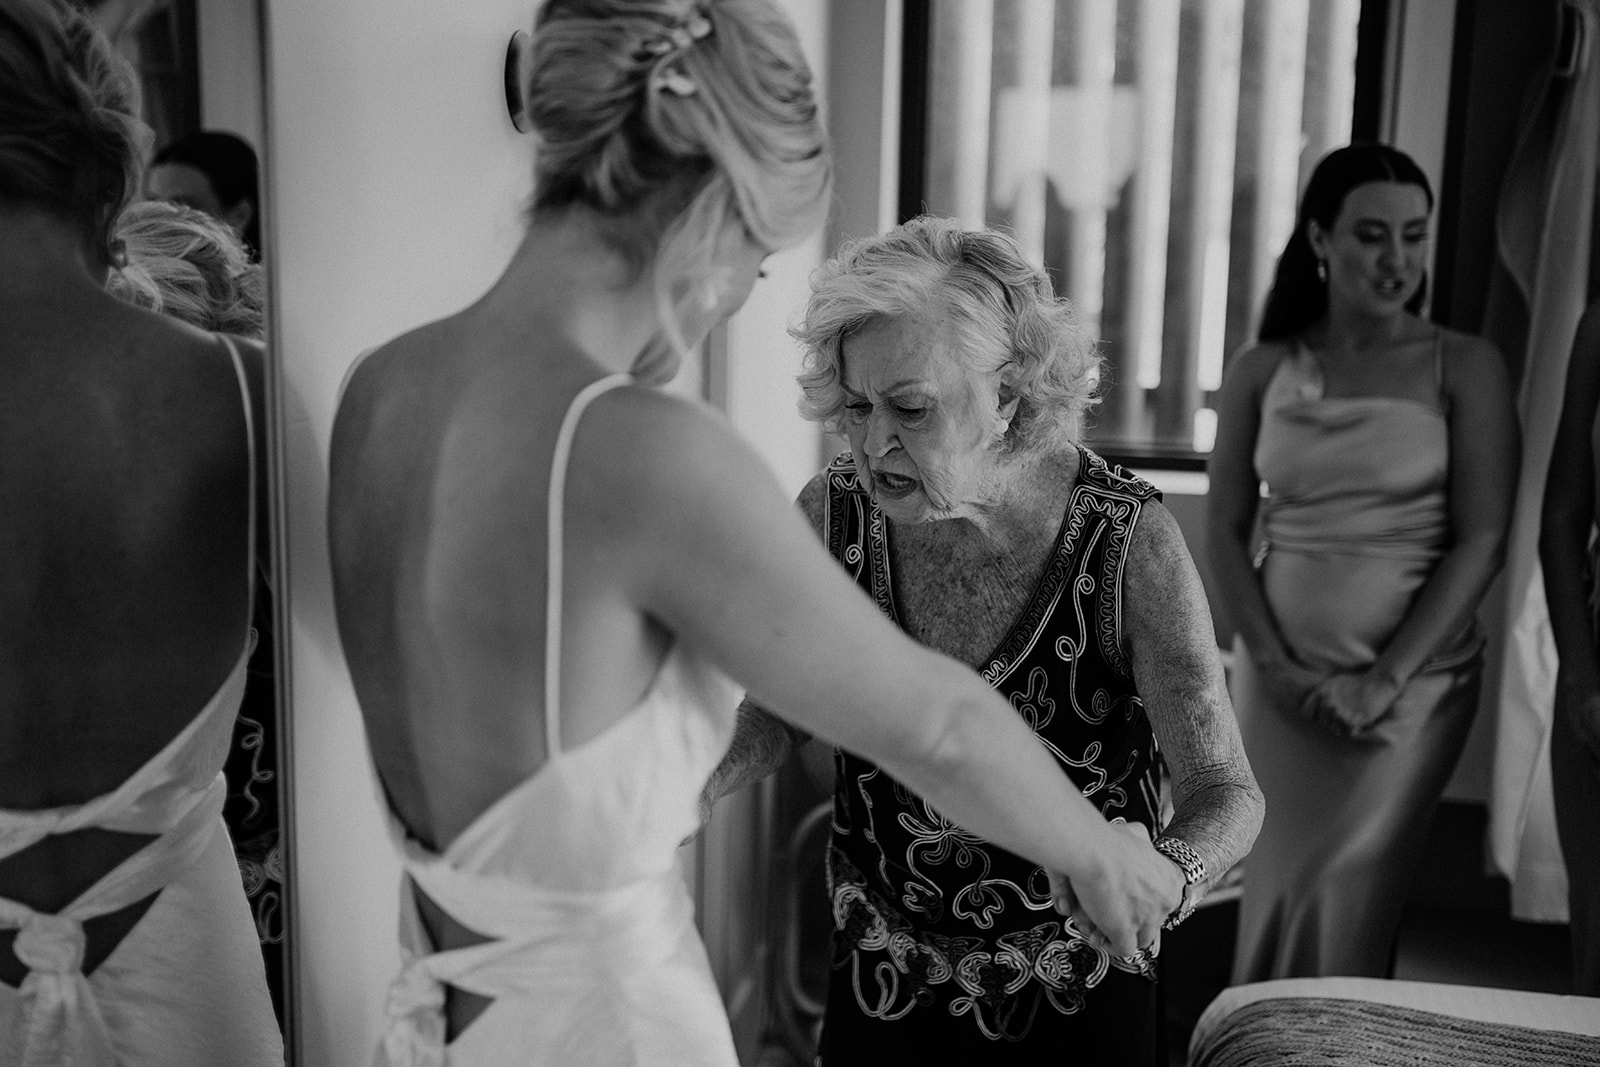 Bride first look with her grandmother at the wedding in The Fernery Mosman